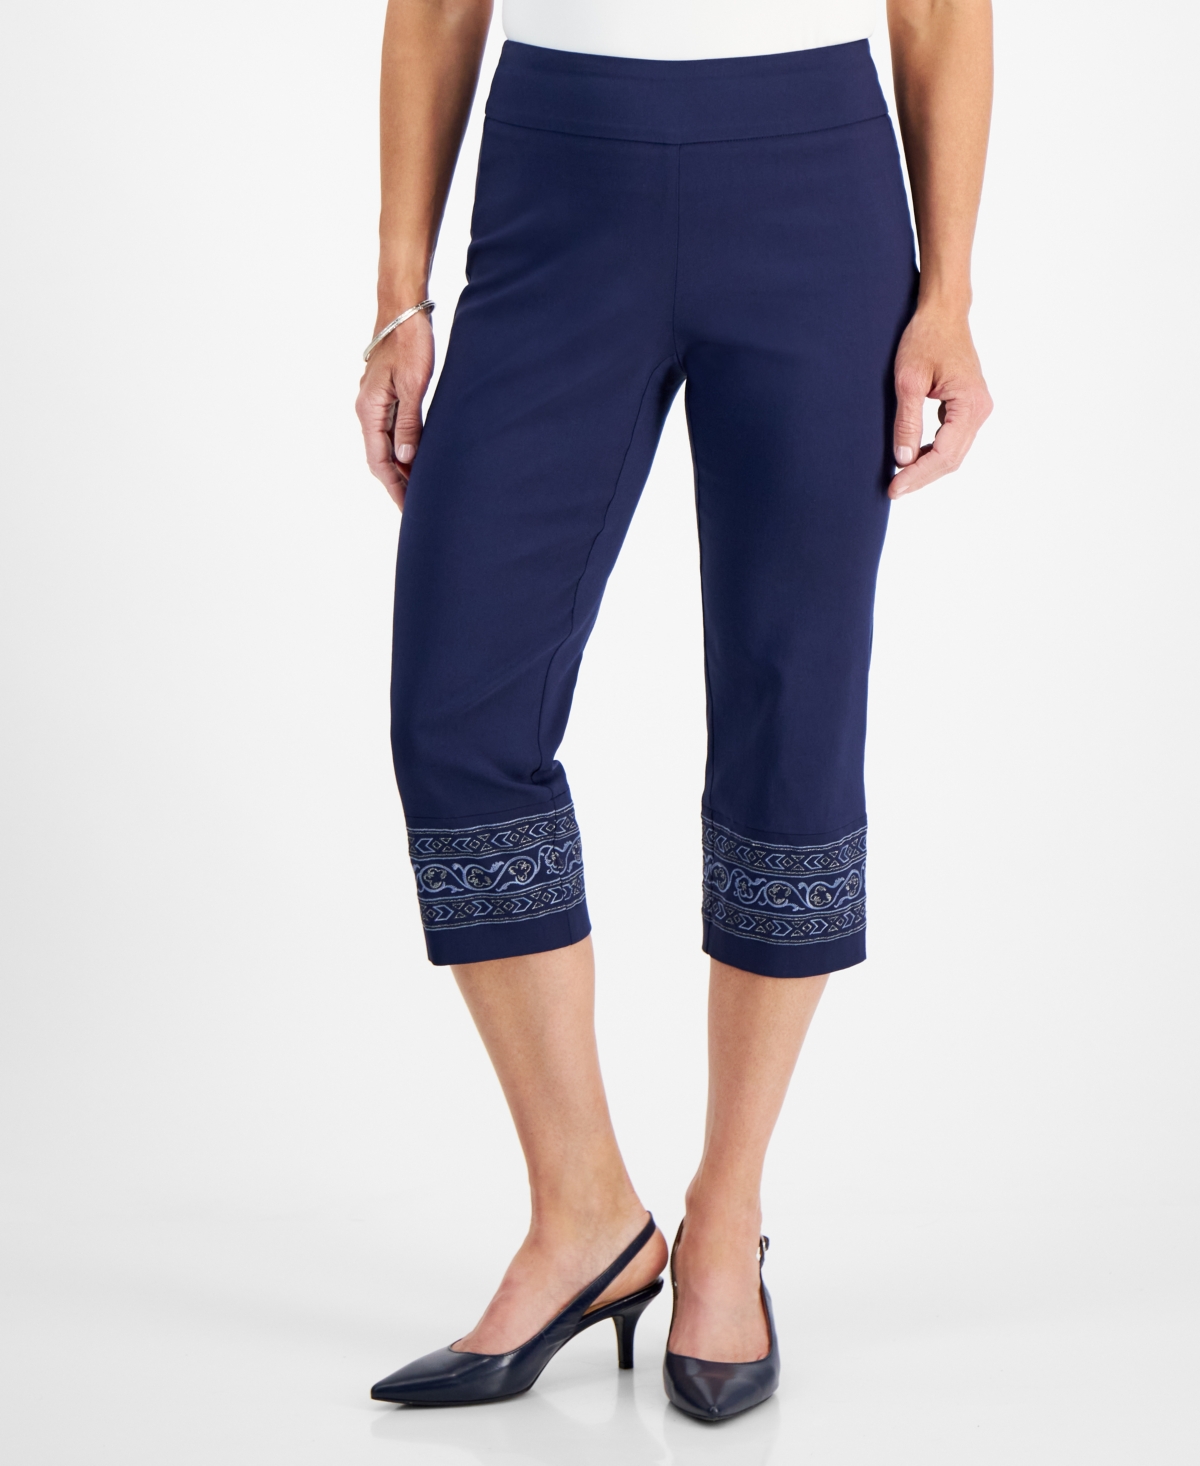 Petite Embroidered-Trim Capri Pants, Created for Macy's - Intrepid Blue Combo